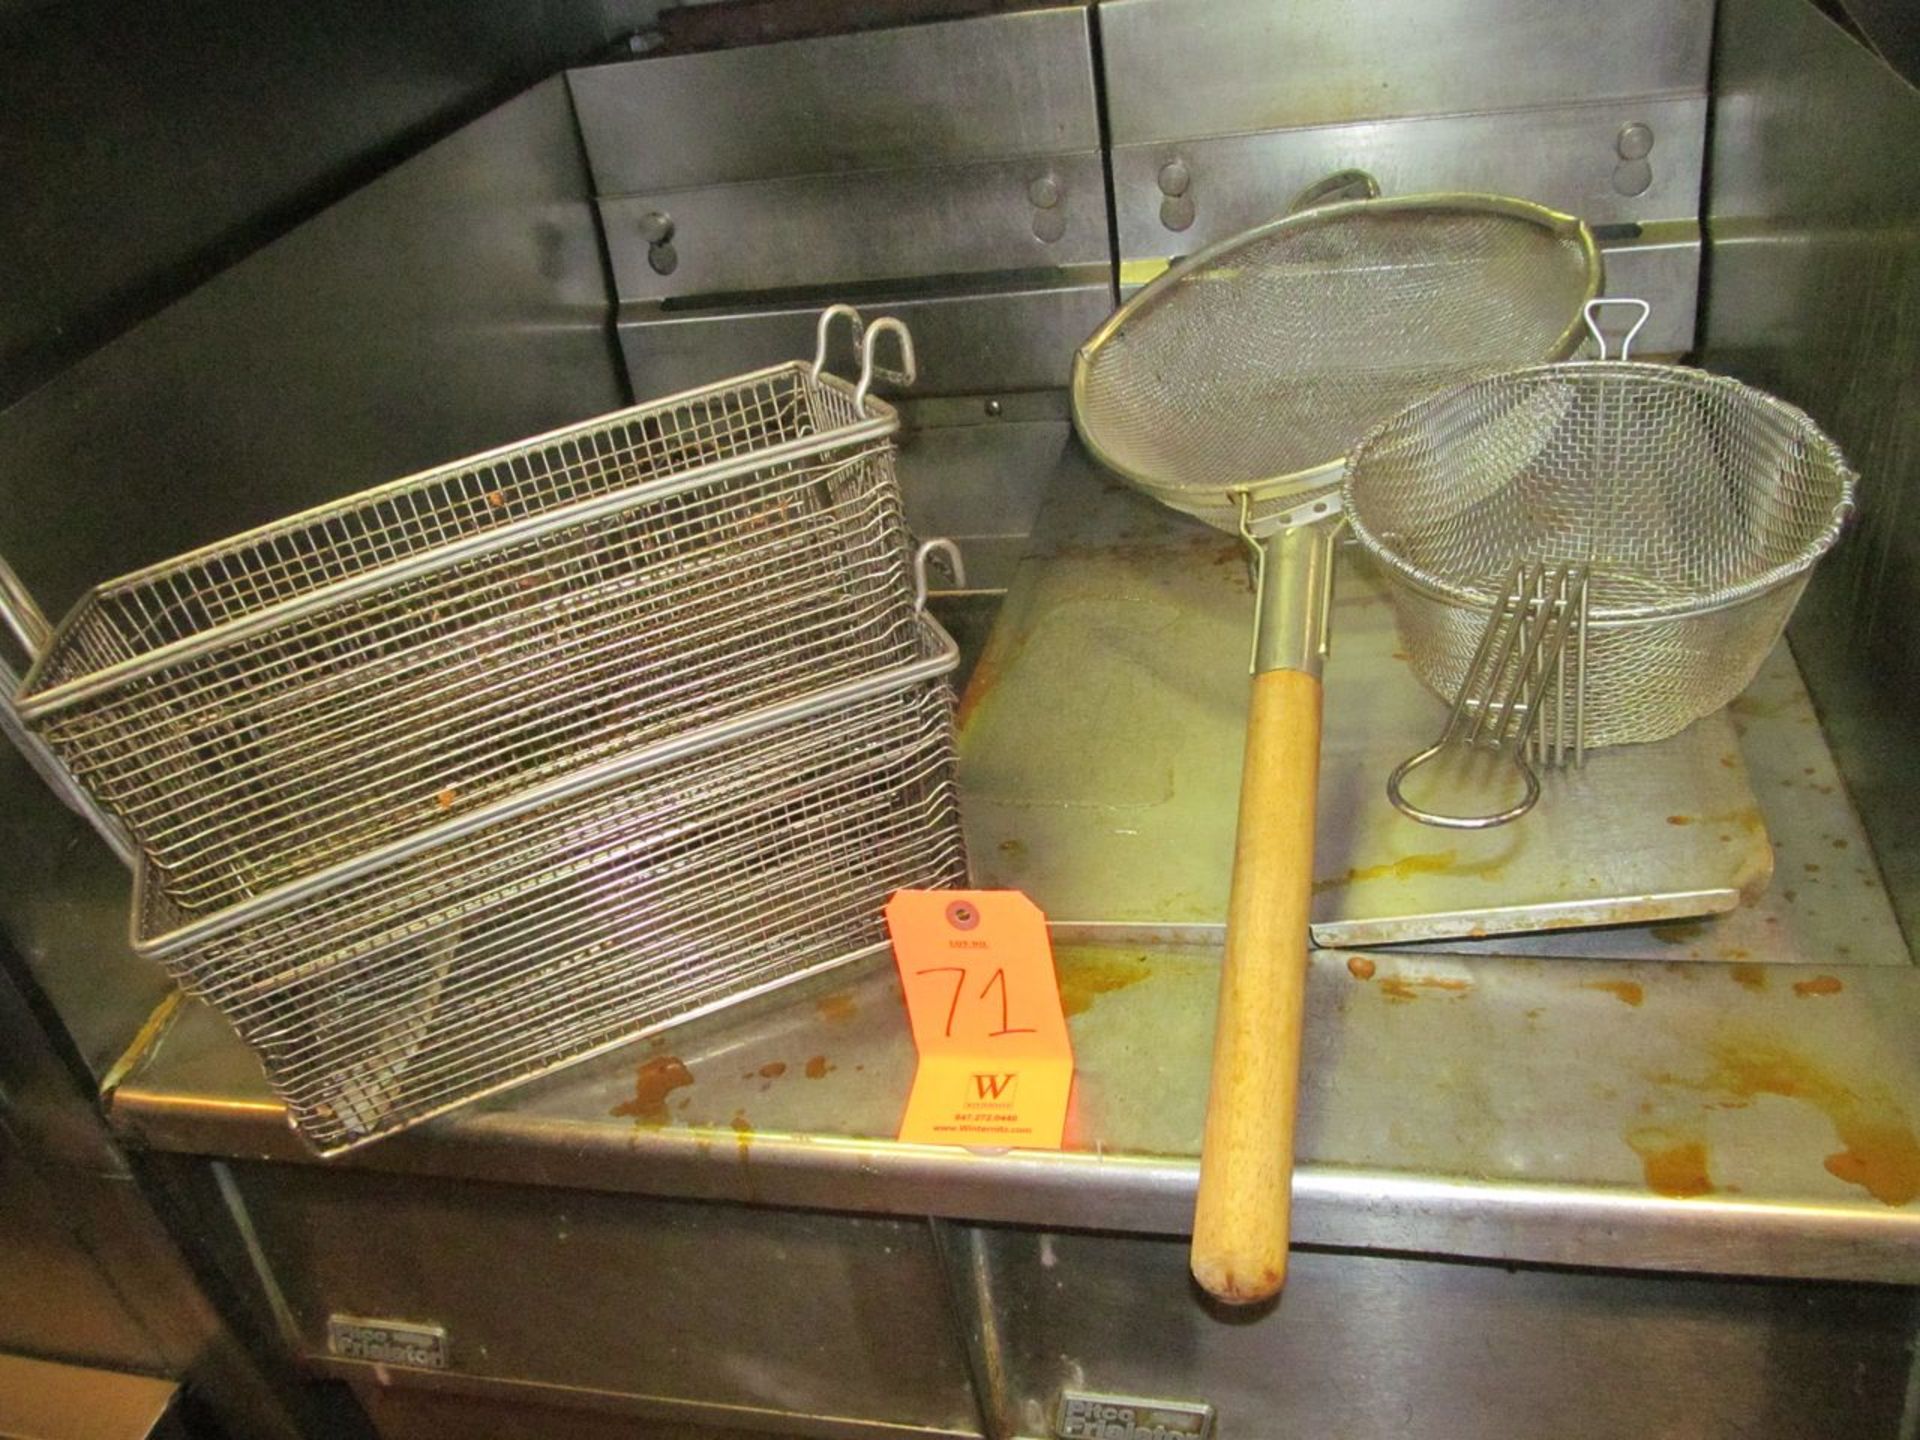 Pitco Frialator 2-Station Deep Fryer; with Related Baskets (Kitchen) - Image 2 of 2